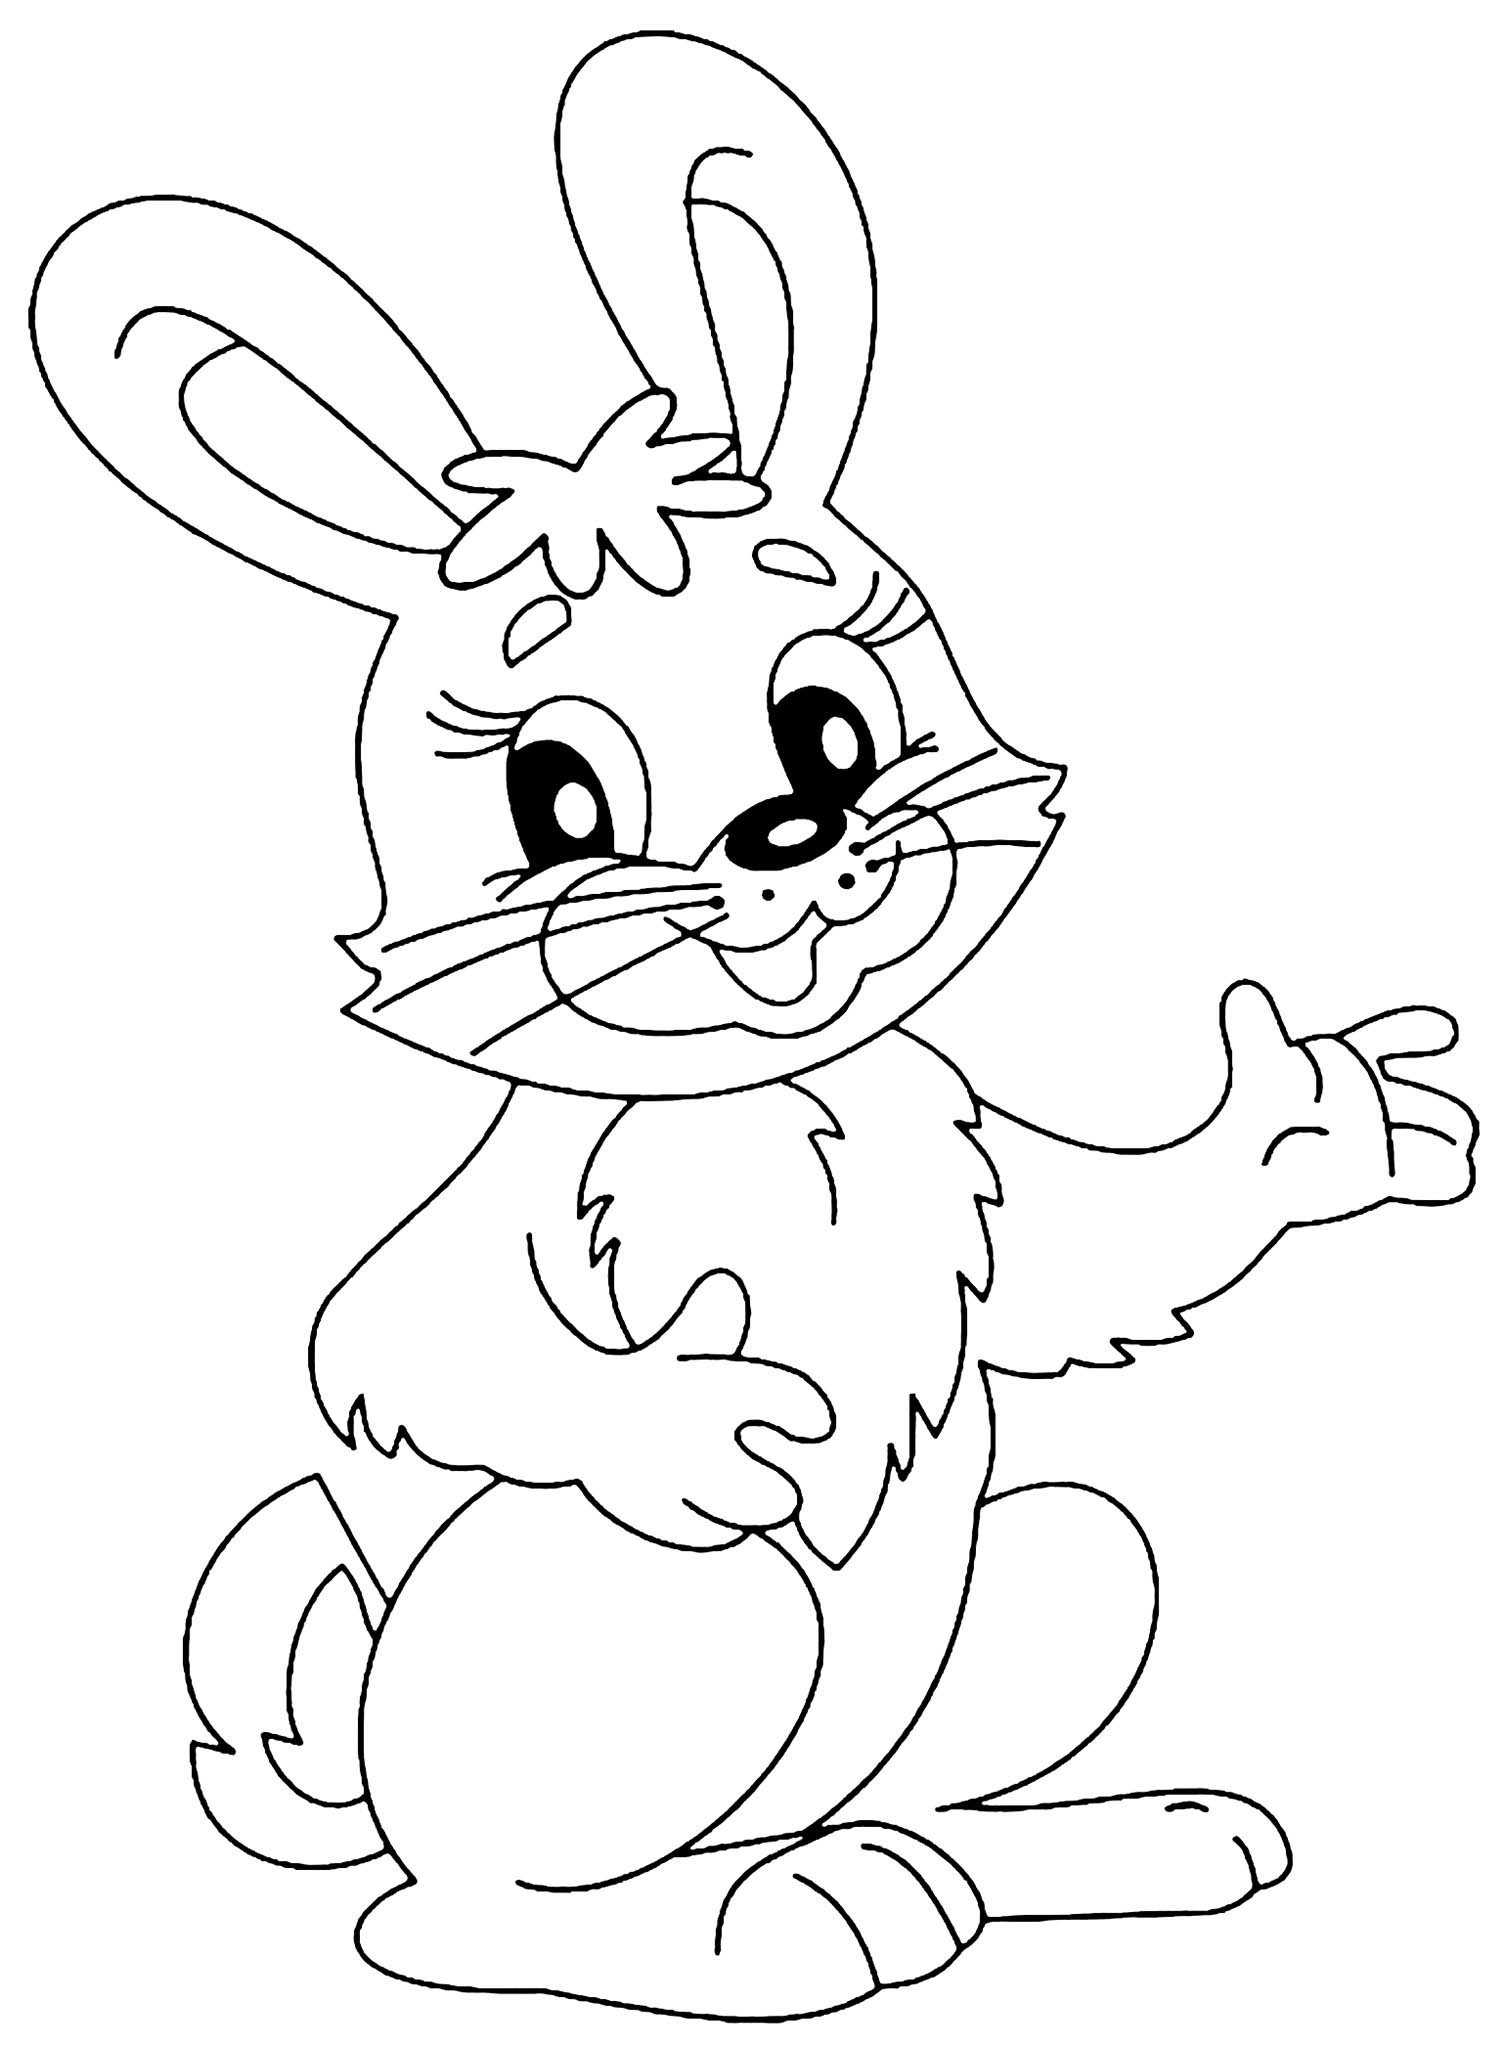 Image Of Rabbit To Print And Color - Rabbits &Amp; Bunnies Kids Coloring Pages